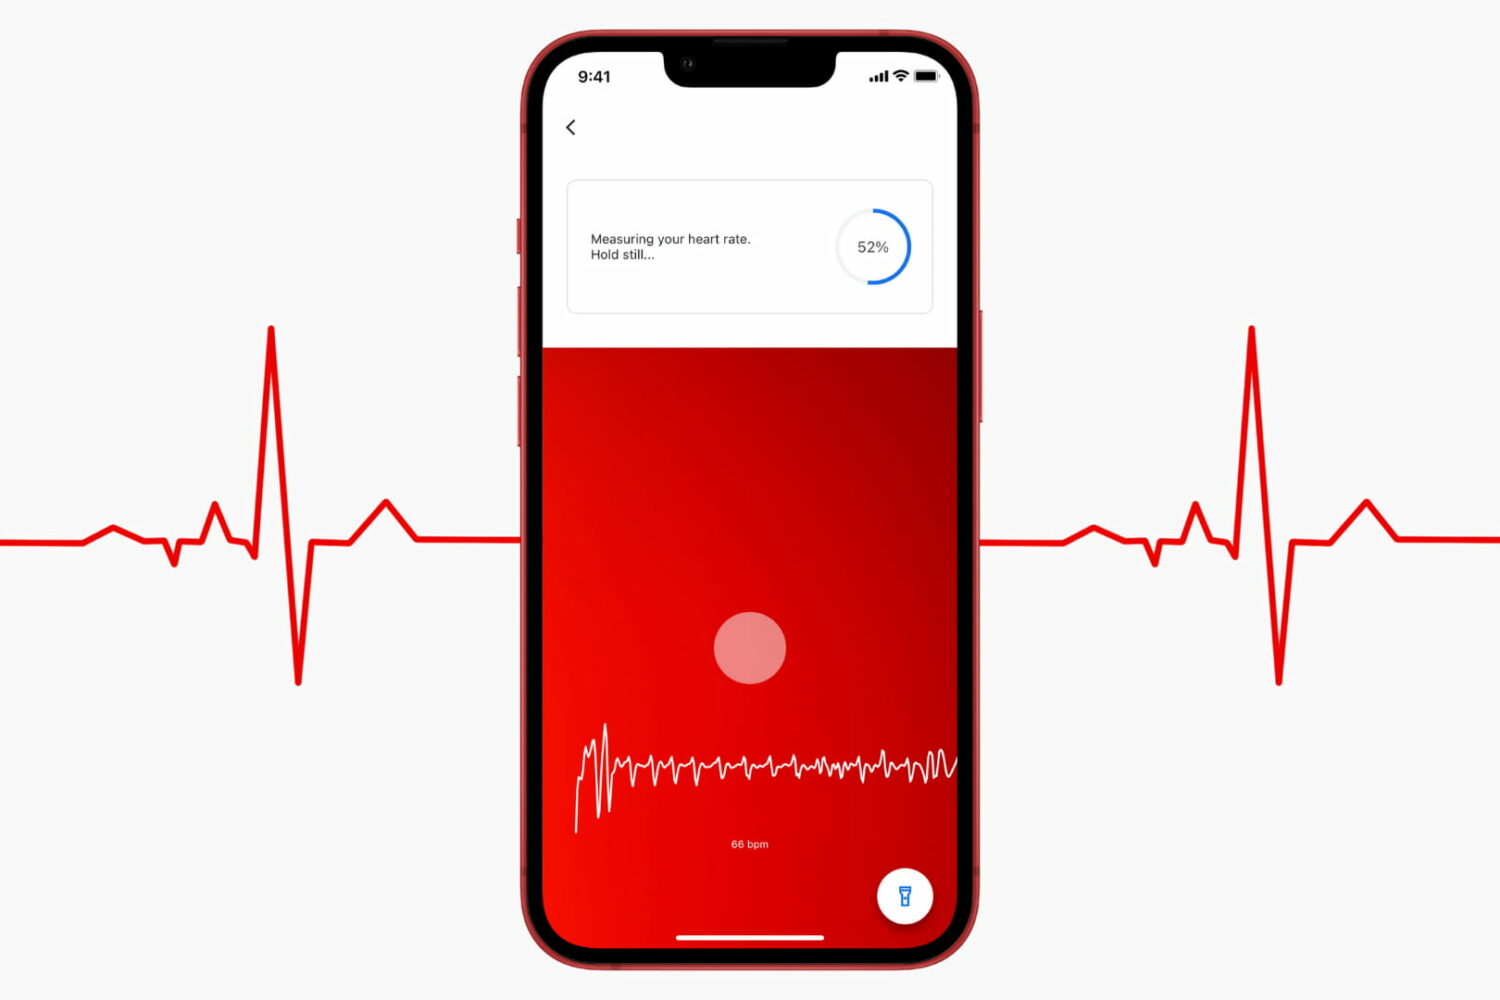 Measure Heart Rate using Google Fit app on iPhone